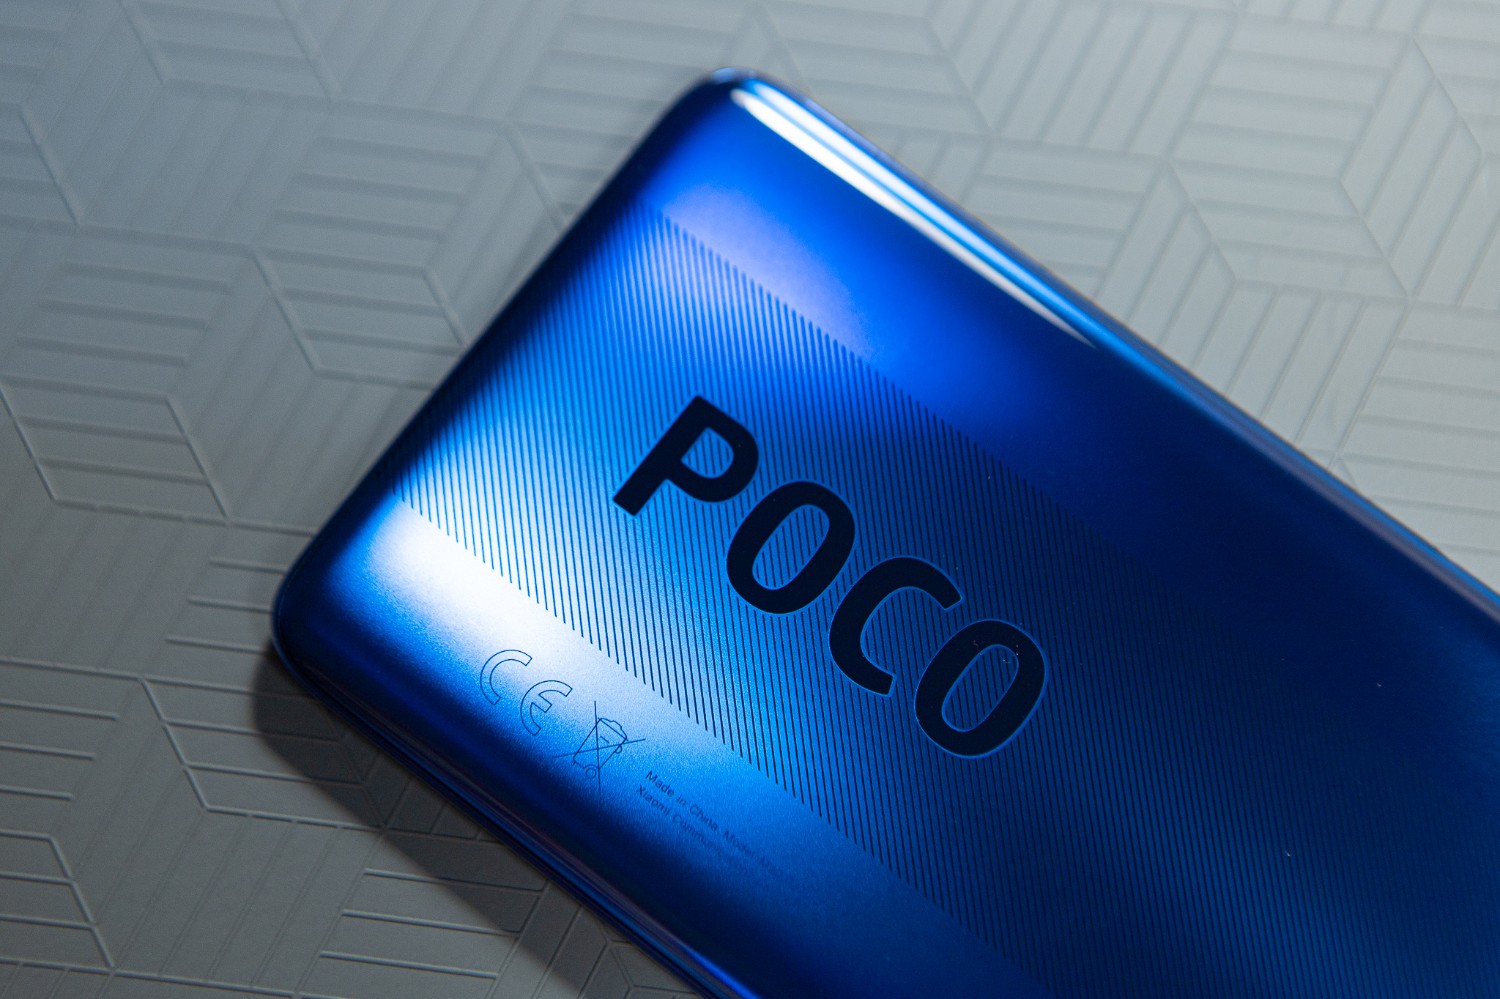 POCO is entering the tablet market and is already preparing its first model